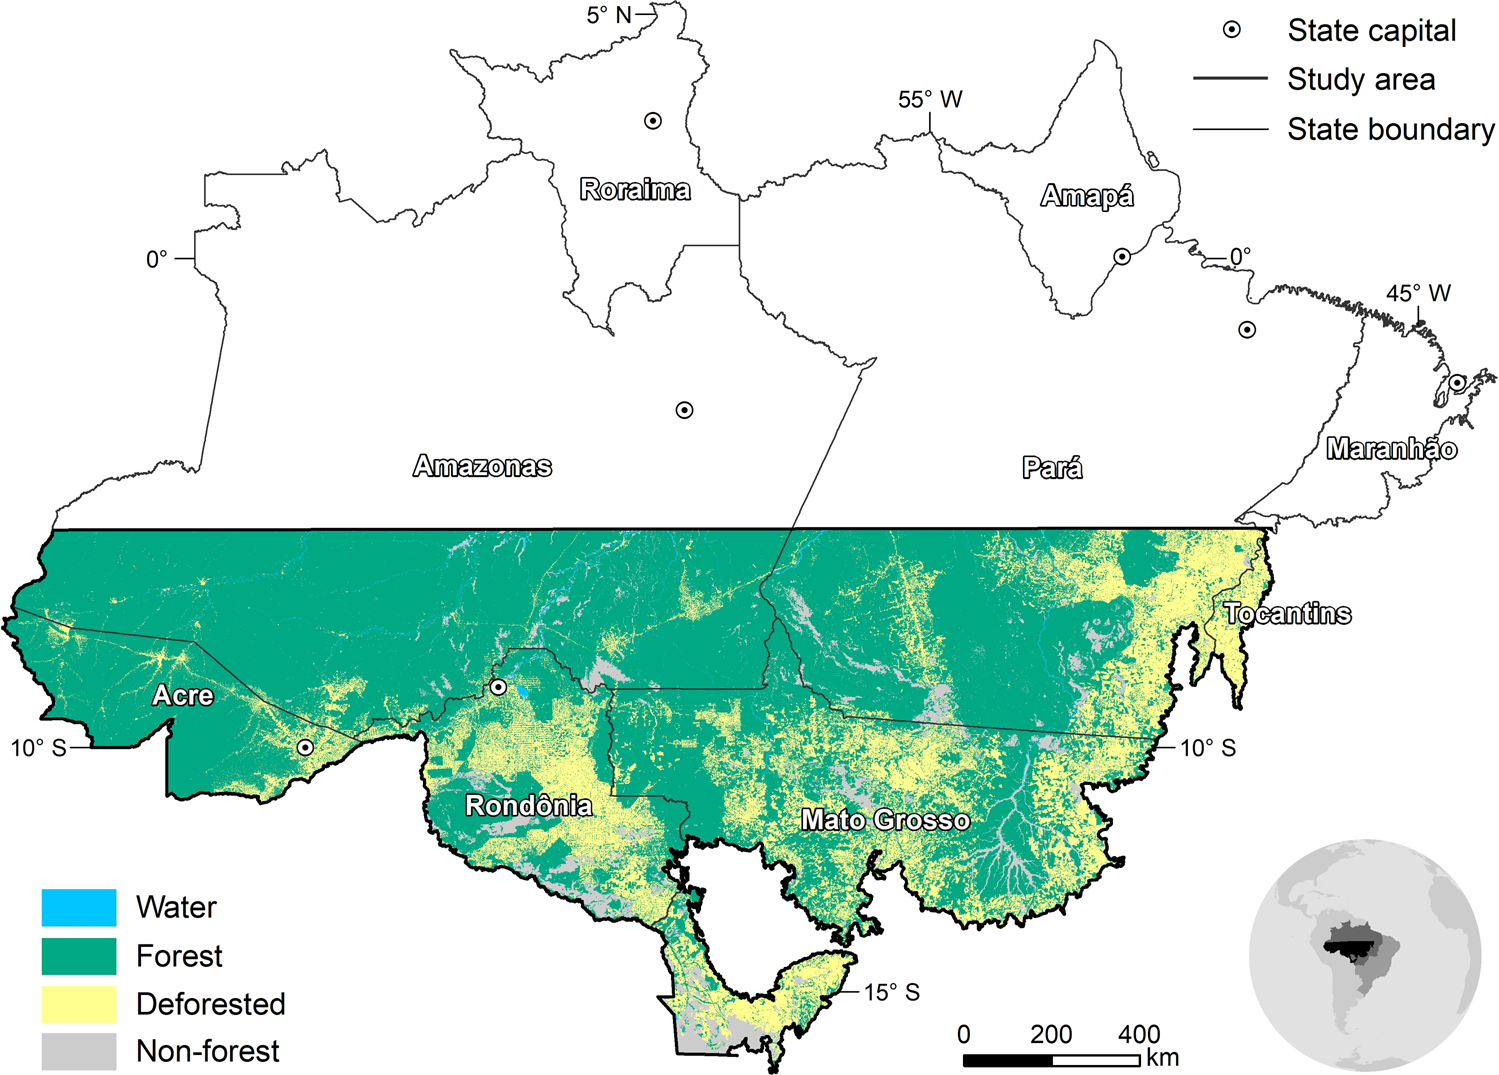 Deforestation reduces rainfall and agricultural revenues in the Brazilian